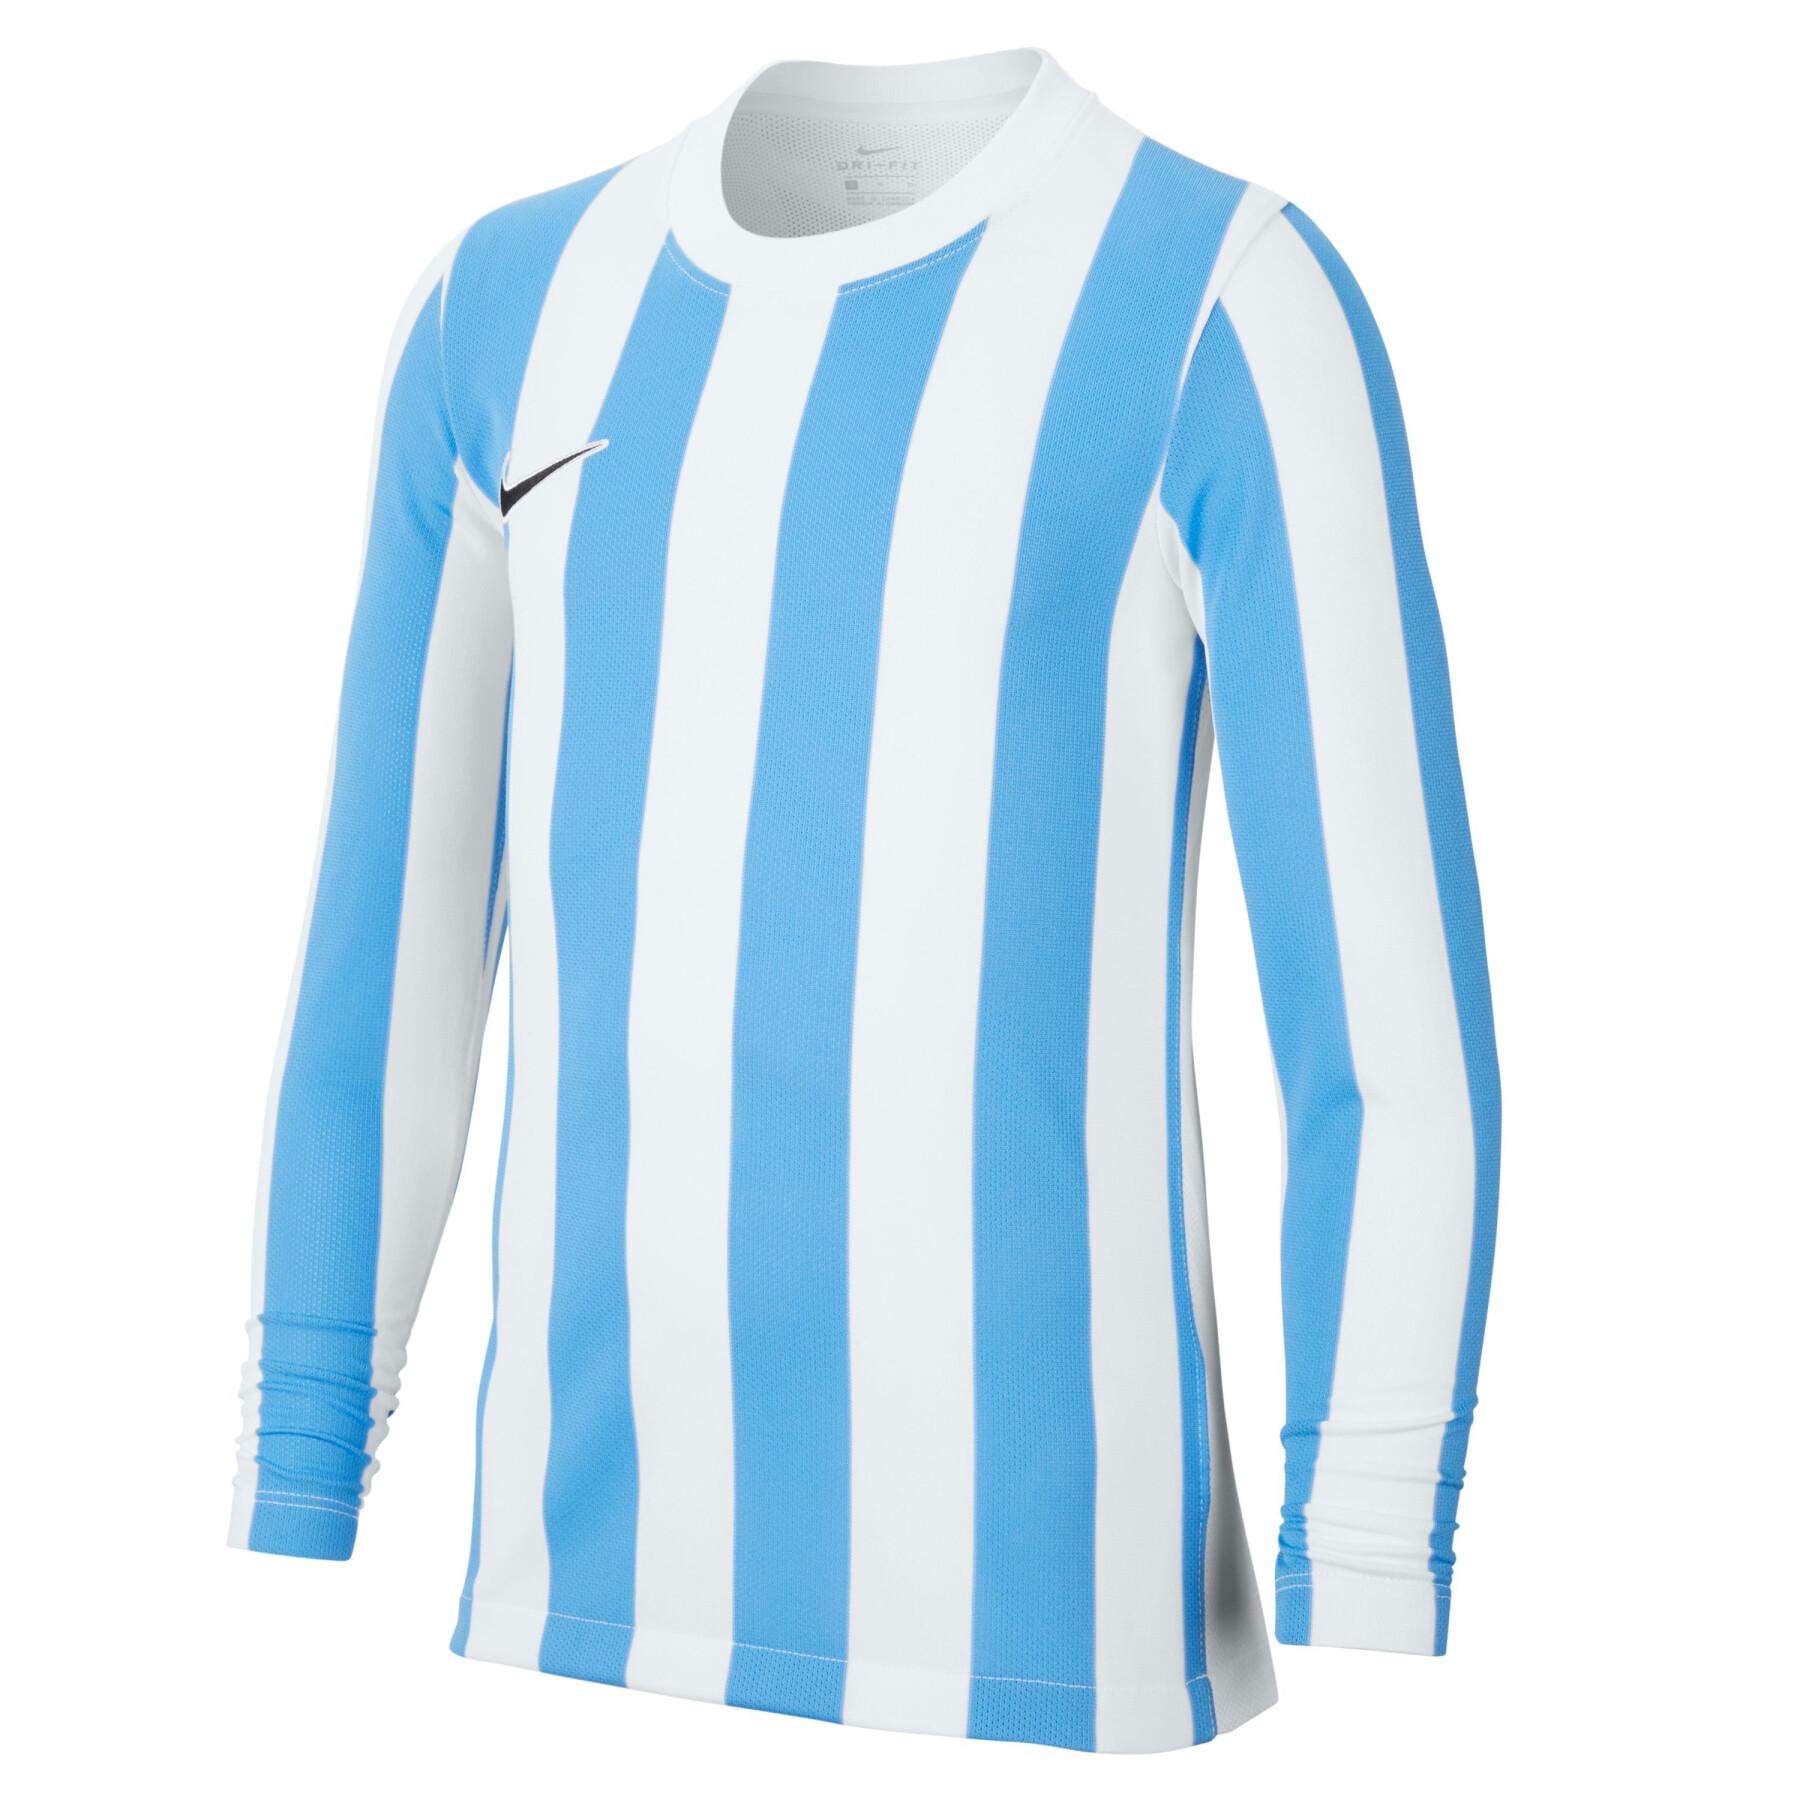 Long sleeve jersey Nike Dynamic Fit Division IV